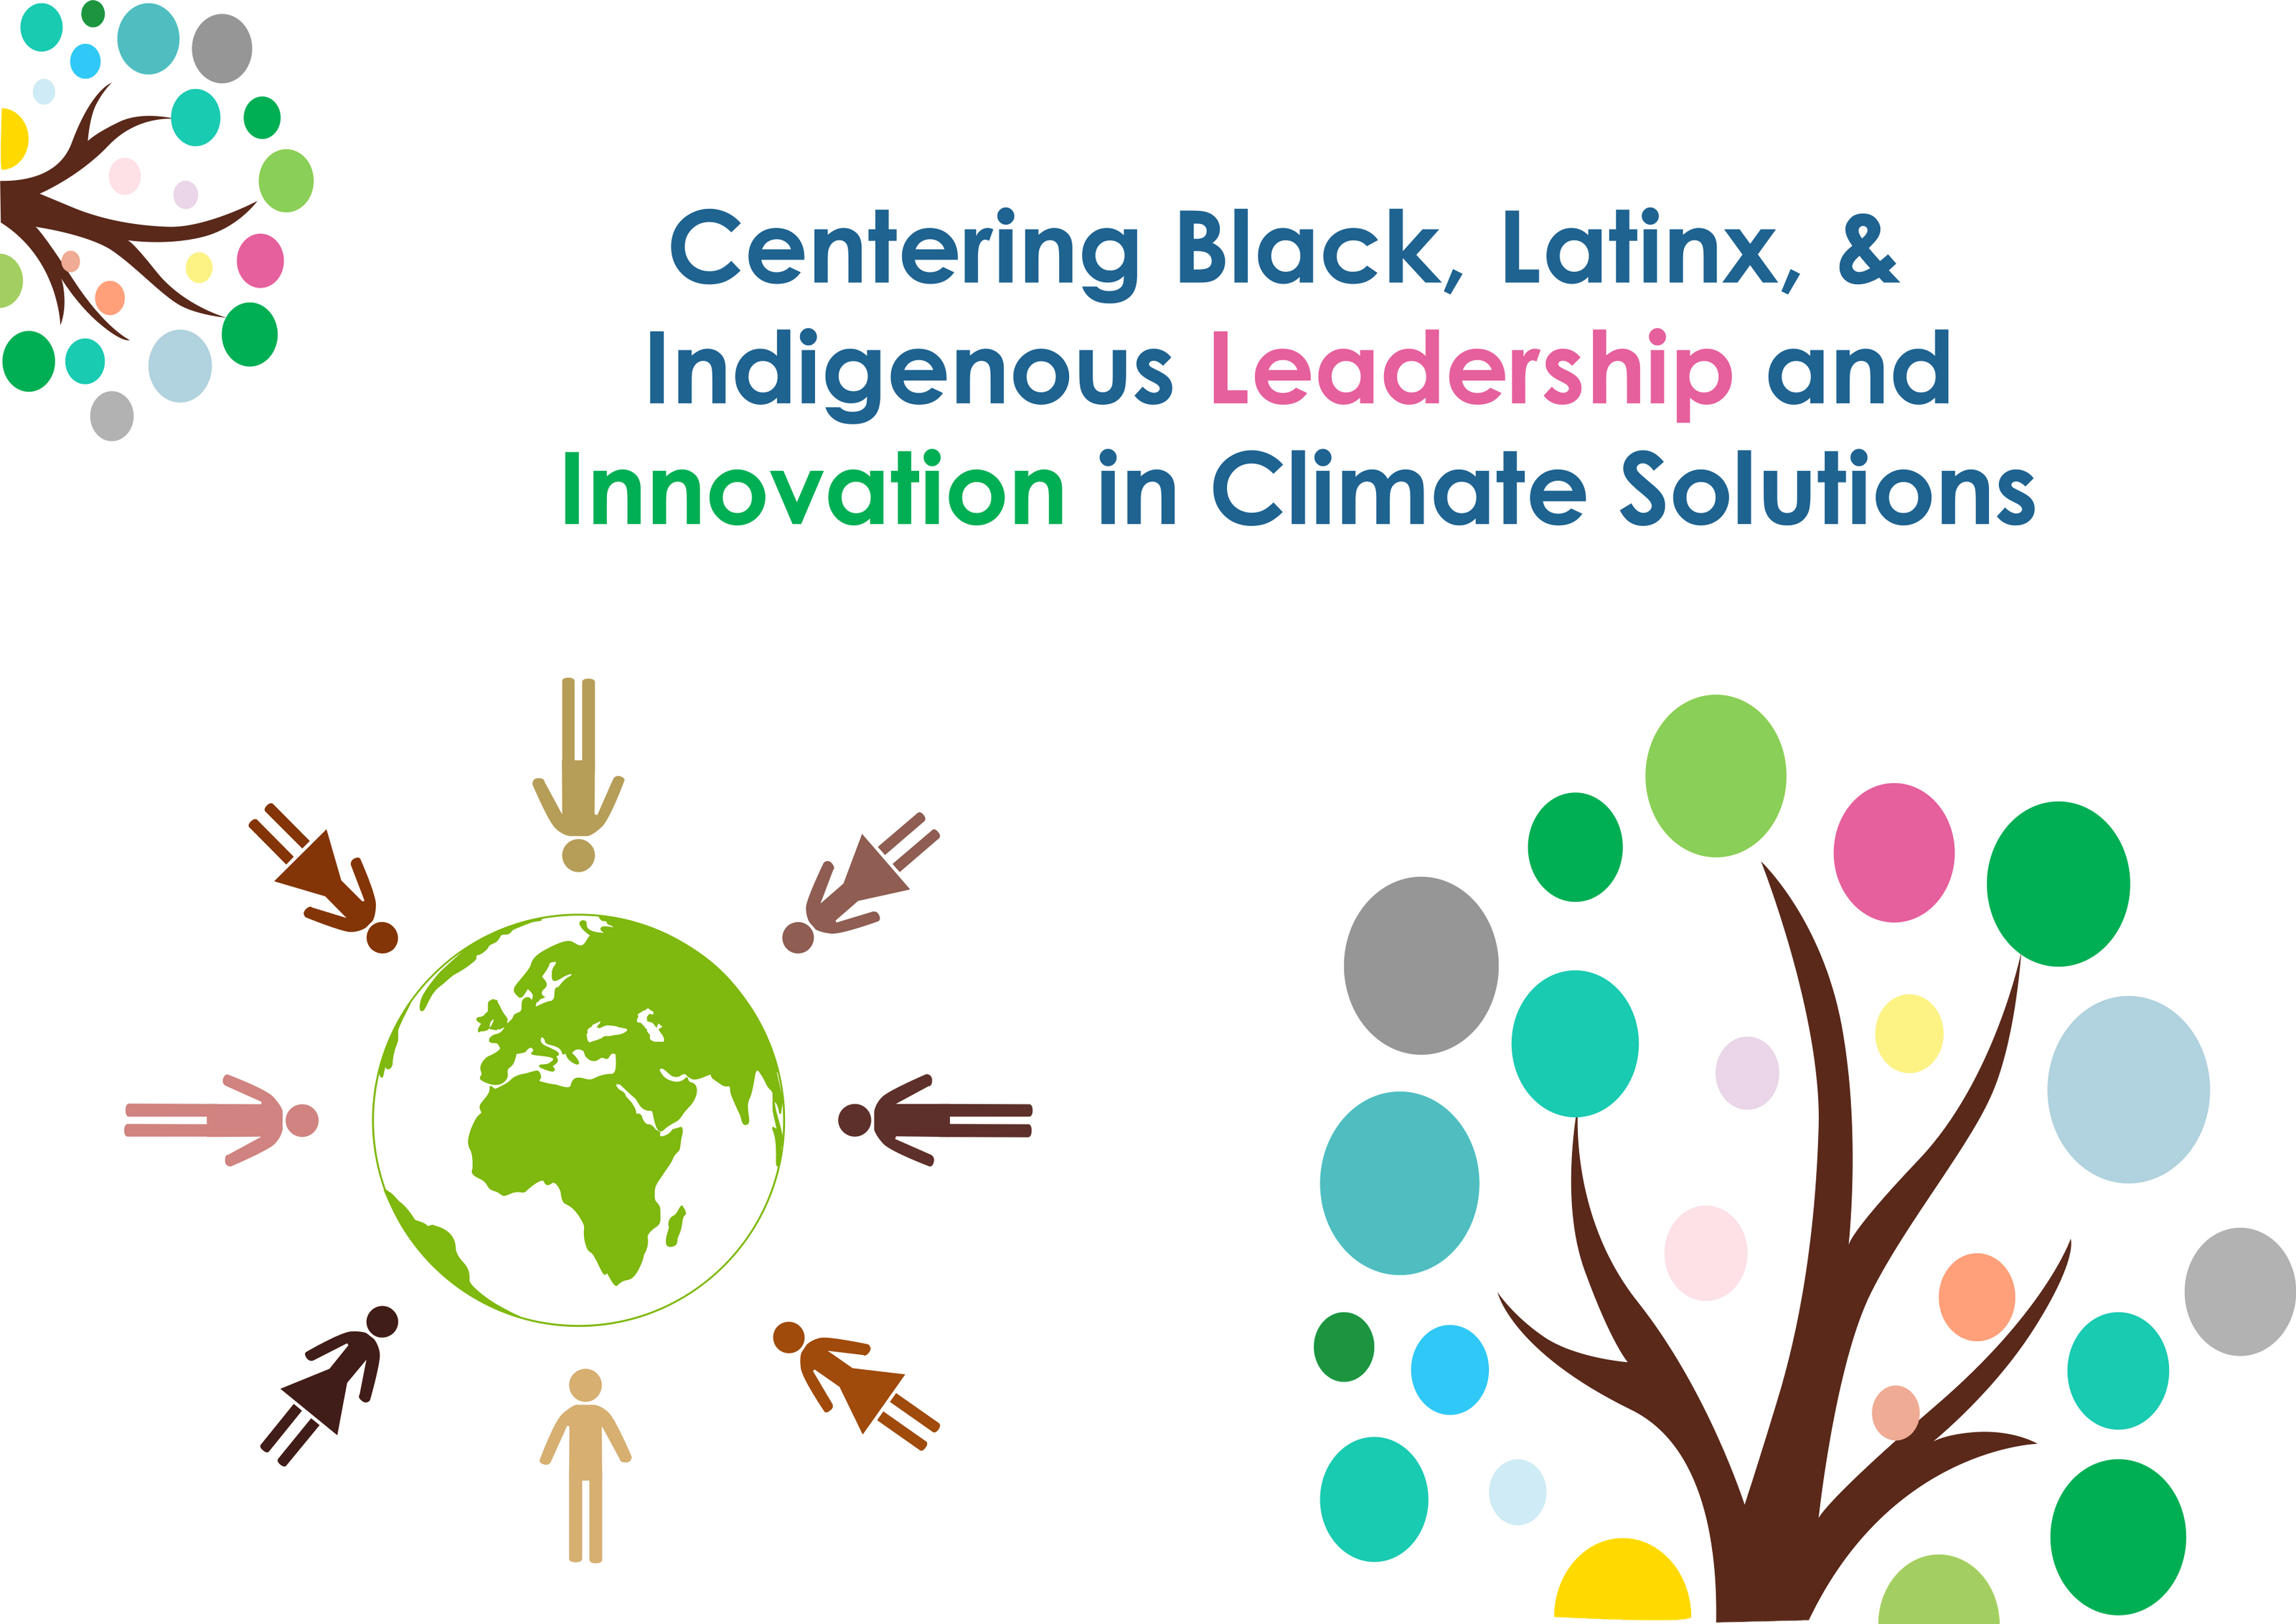 Centering Black, Latinx, and Indigenous Leadership and Innovation in Climate Solutions